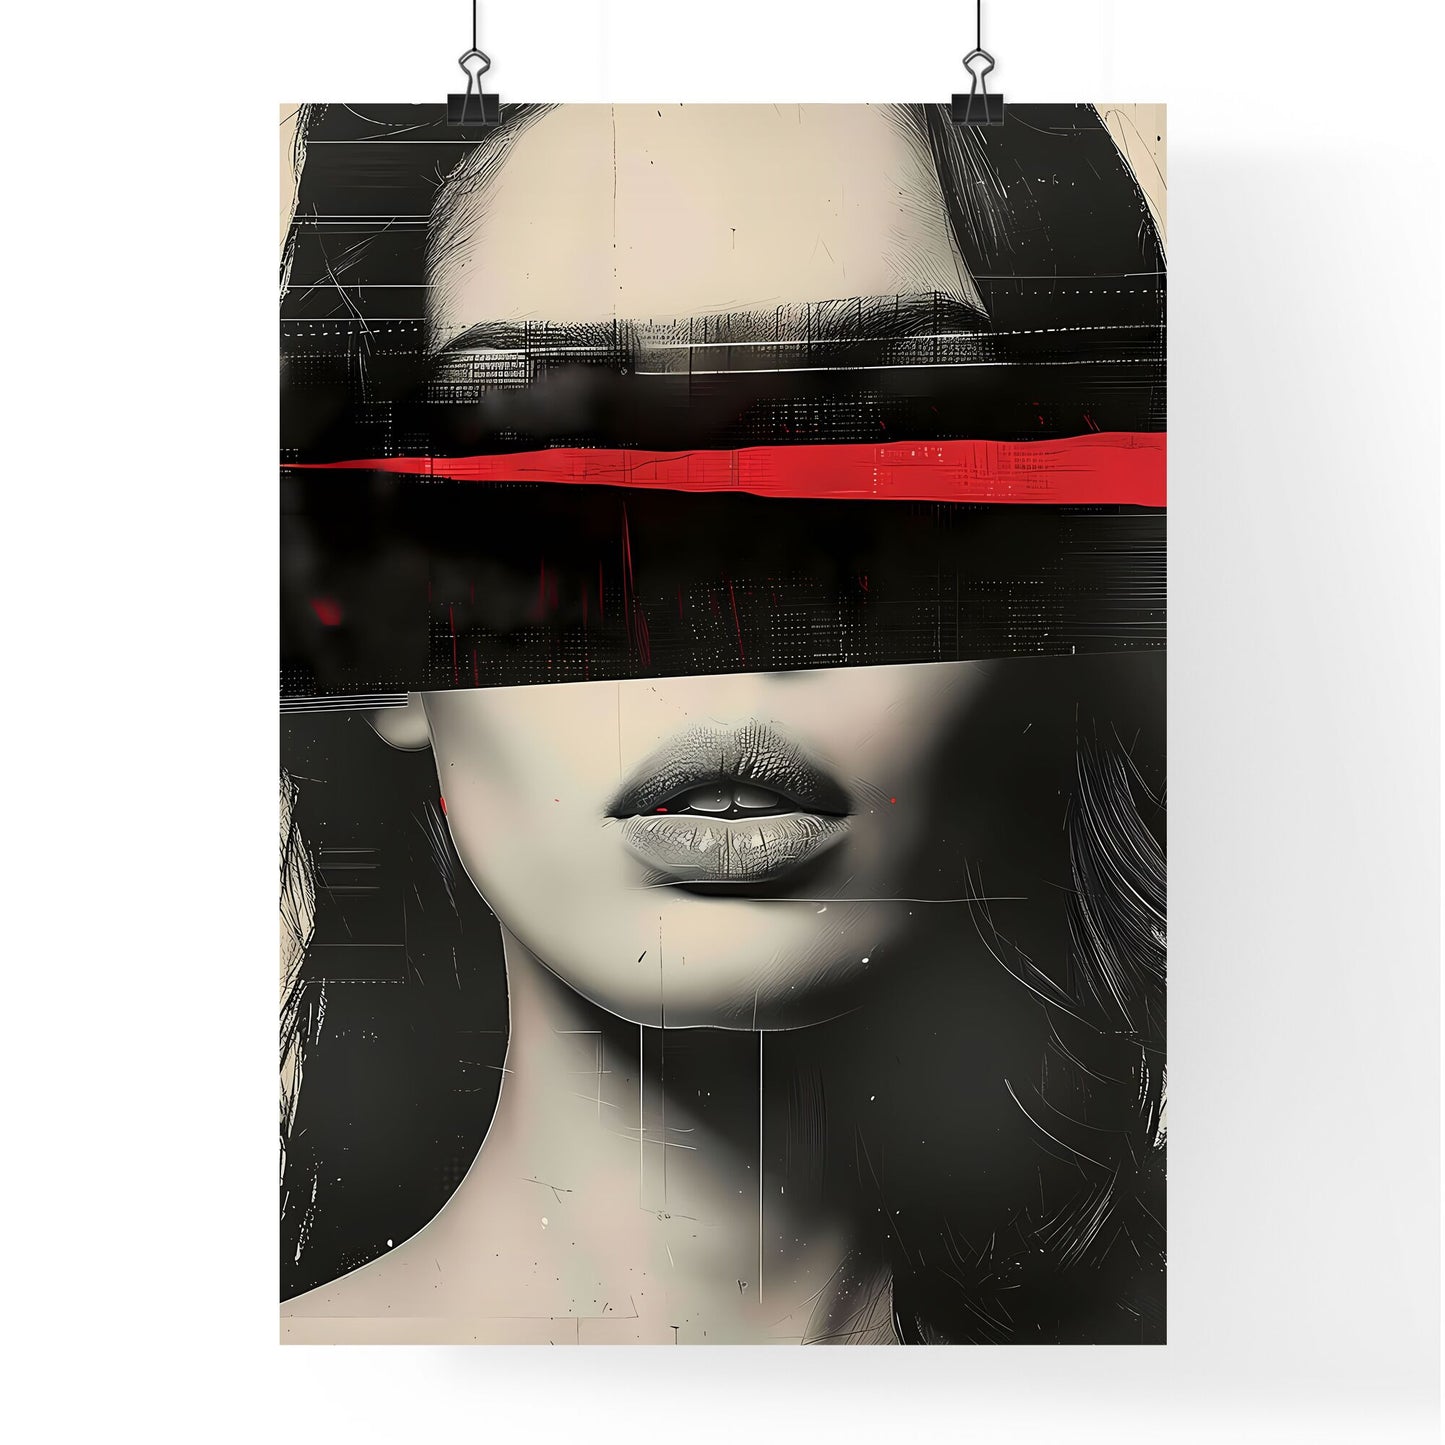 Vibrant Abstract Woman Portrait: Black, Grey, and Red Digital Collage with Striped Eyes Default Title